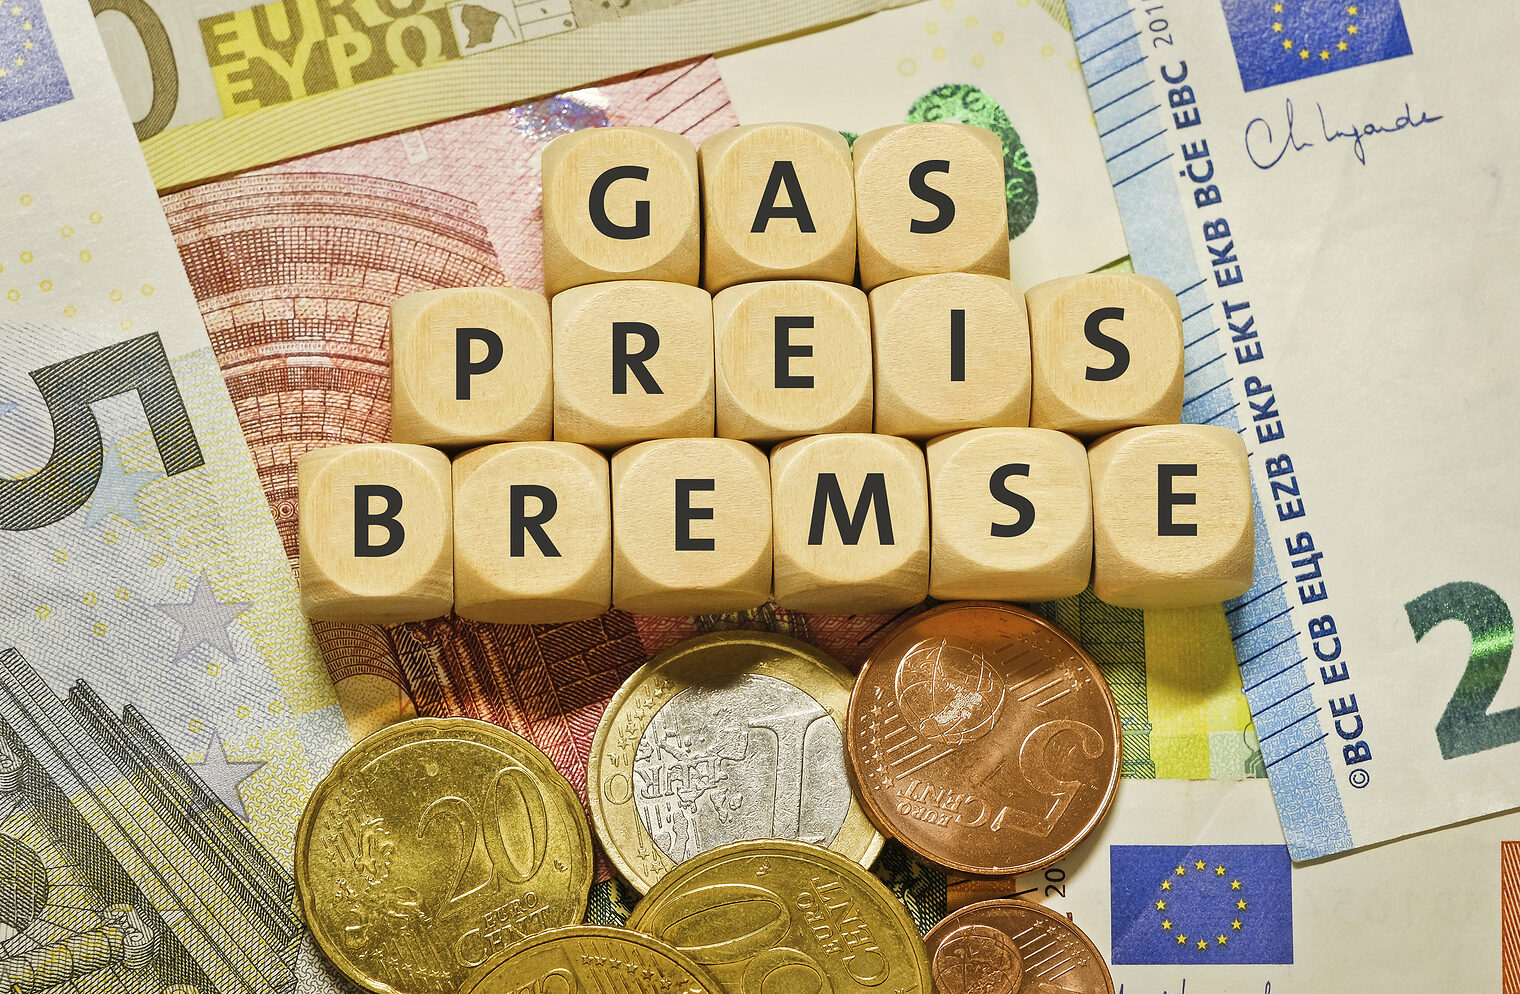 The word "Gaspreisdeckel" in german language, on a stack of euro banknootes and coins. The energy crisis is driving the cost of gas to unprecedented heights. Governments introduce financial support (gas price cap) for end consumers and companies.